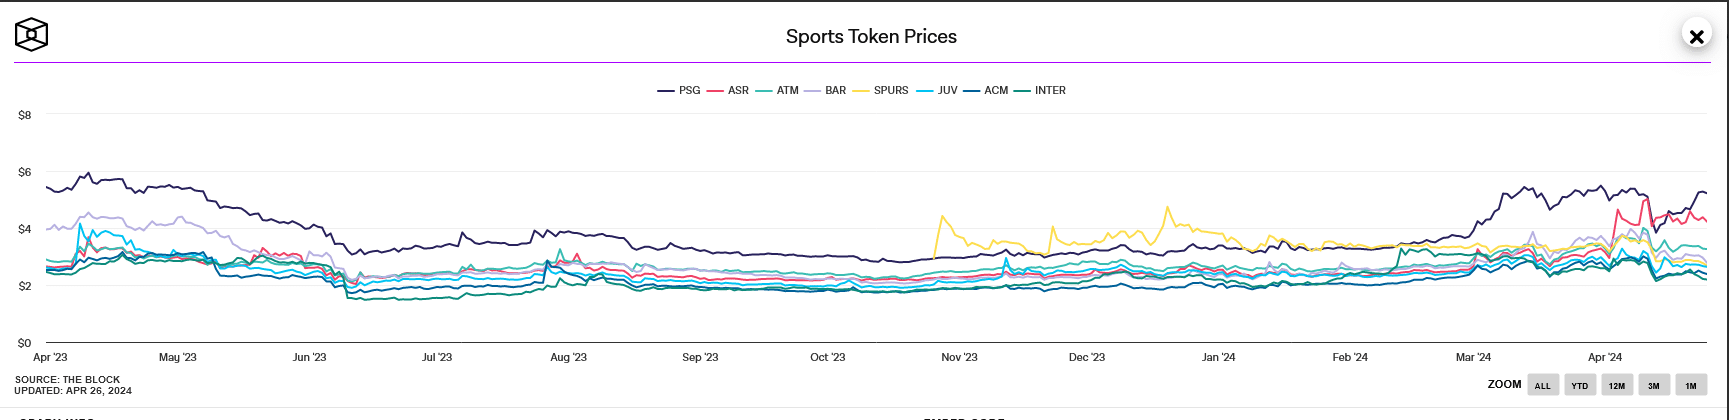 PSG and AS Roma fan tokens are bucking the trend, edging higher after their recent European success and progress to the semi finals